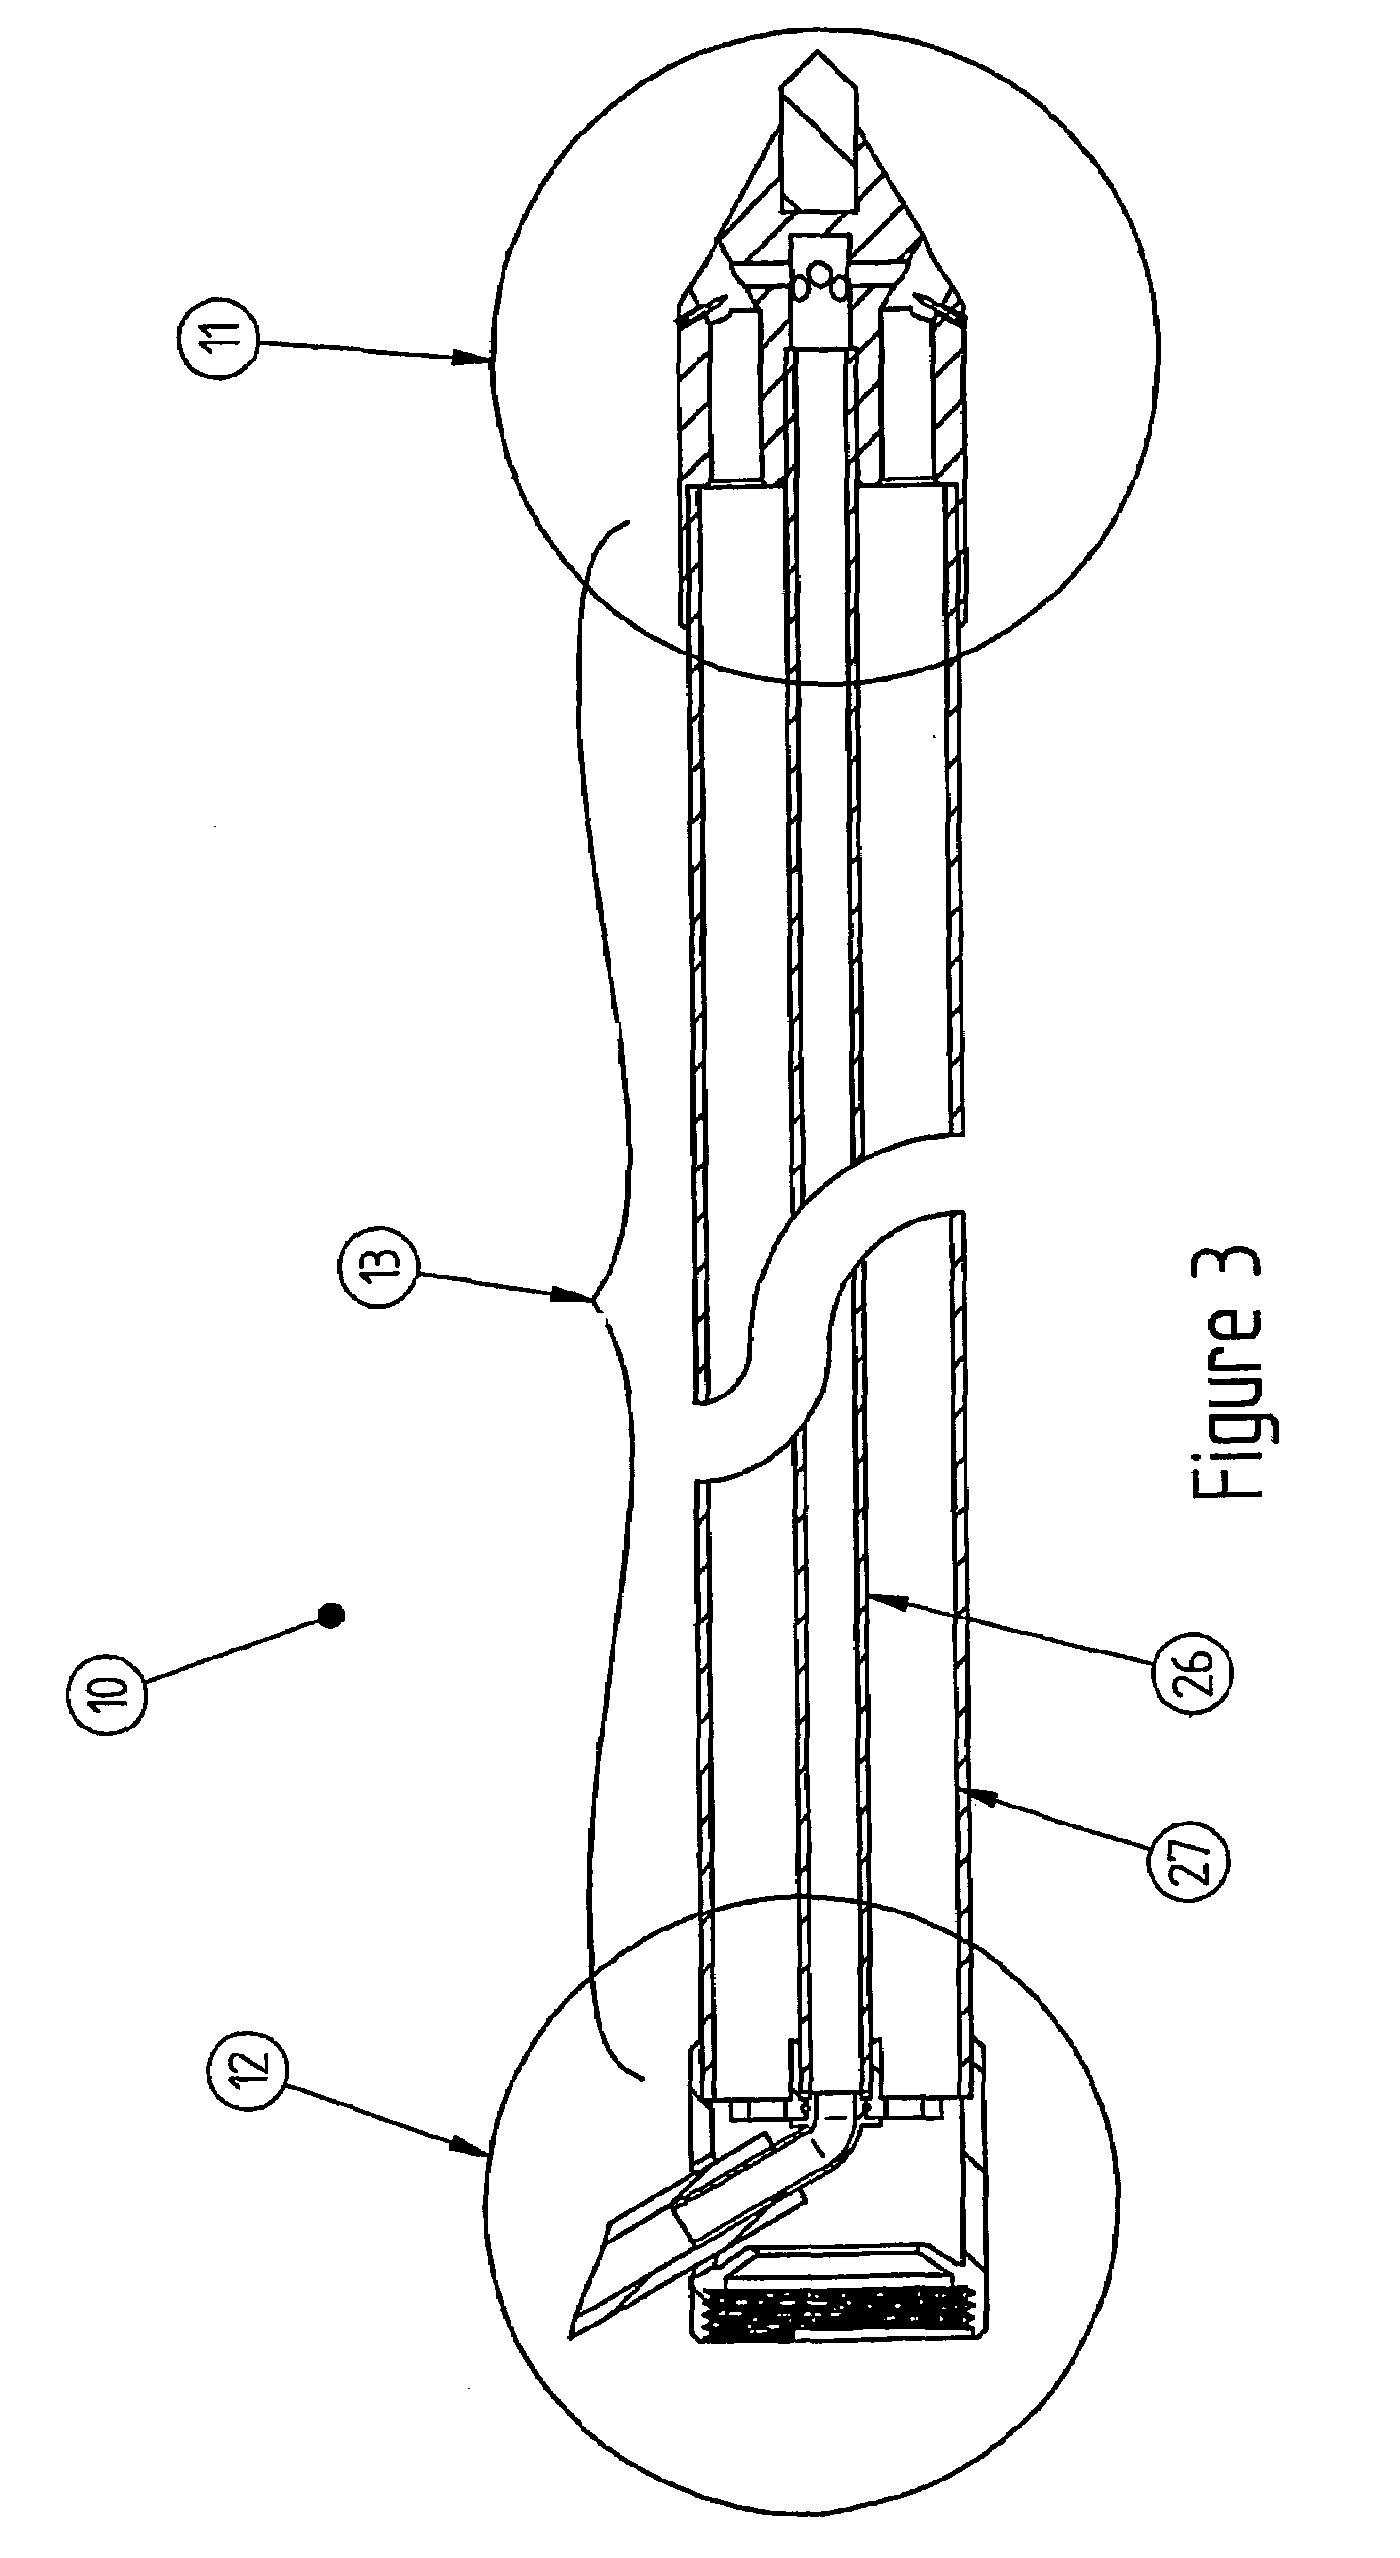 Dispersion and aeration apparatus for compressed air foam systems